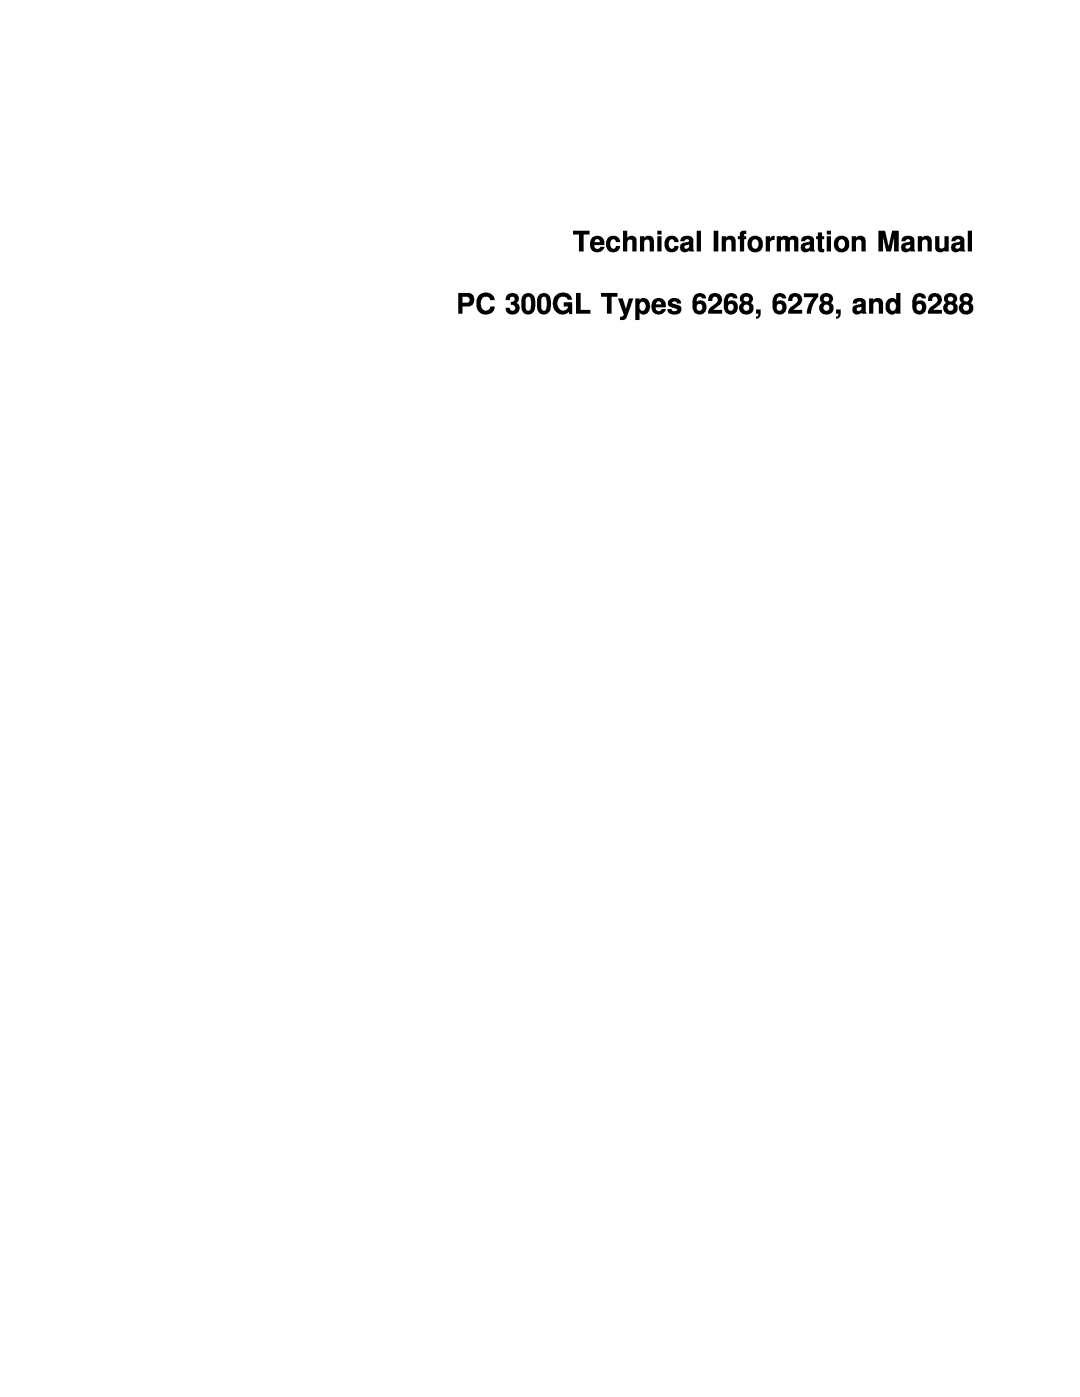 IBM 6288 manual Technical Information Manual PC 300GL Types 6268, 6278, and 